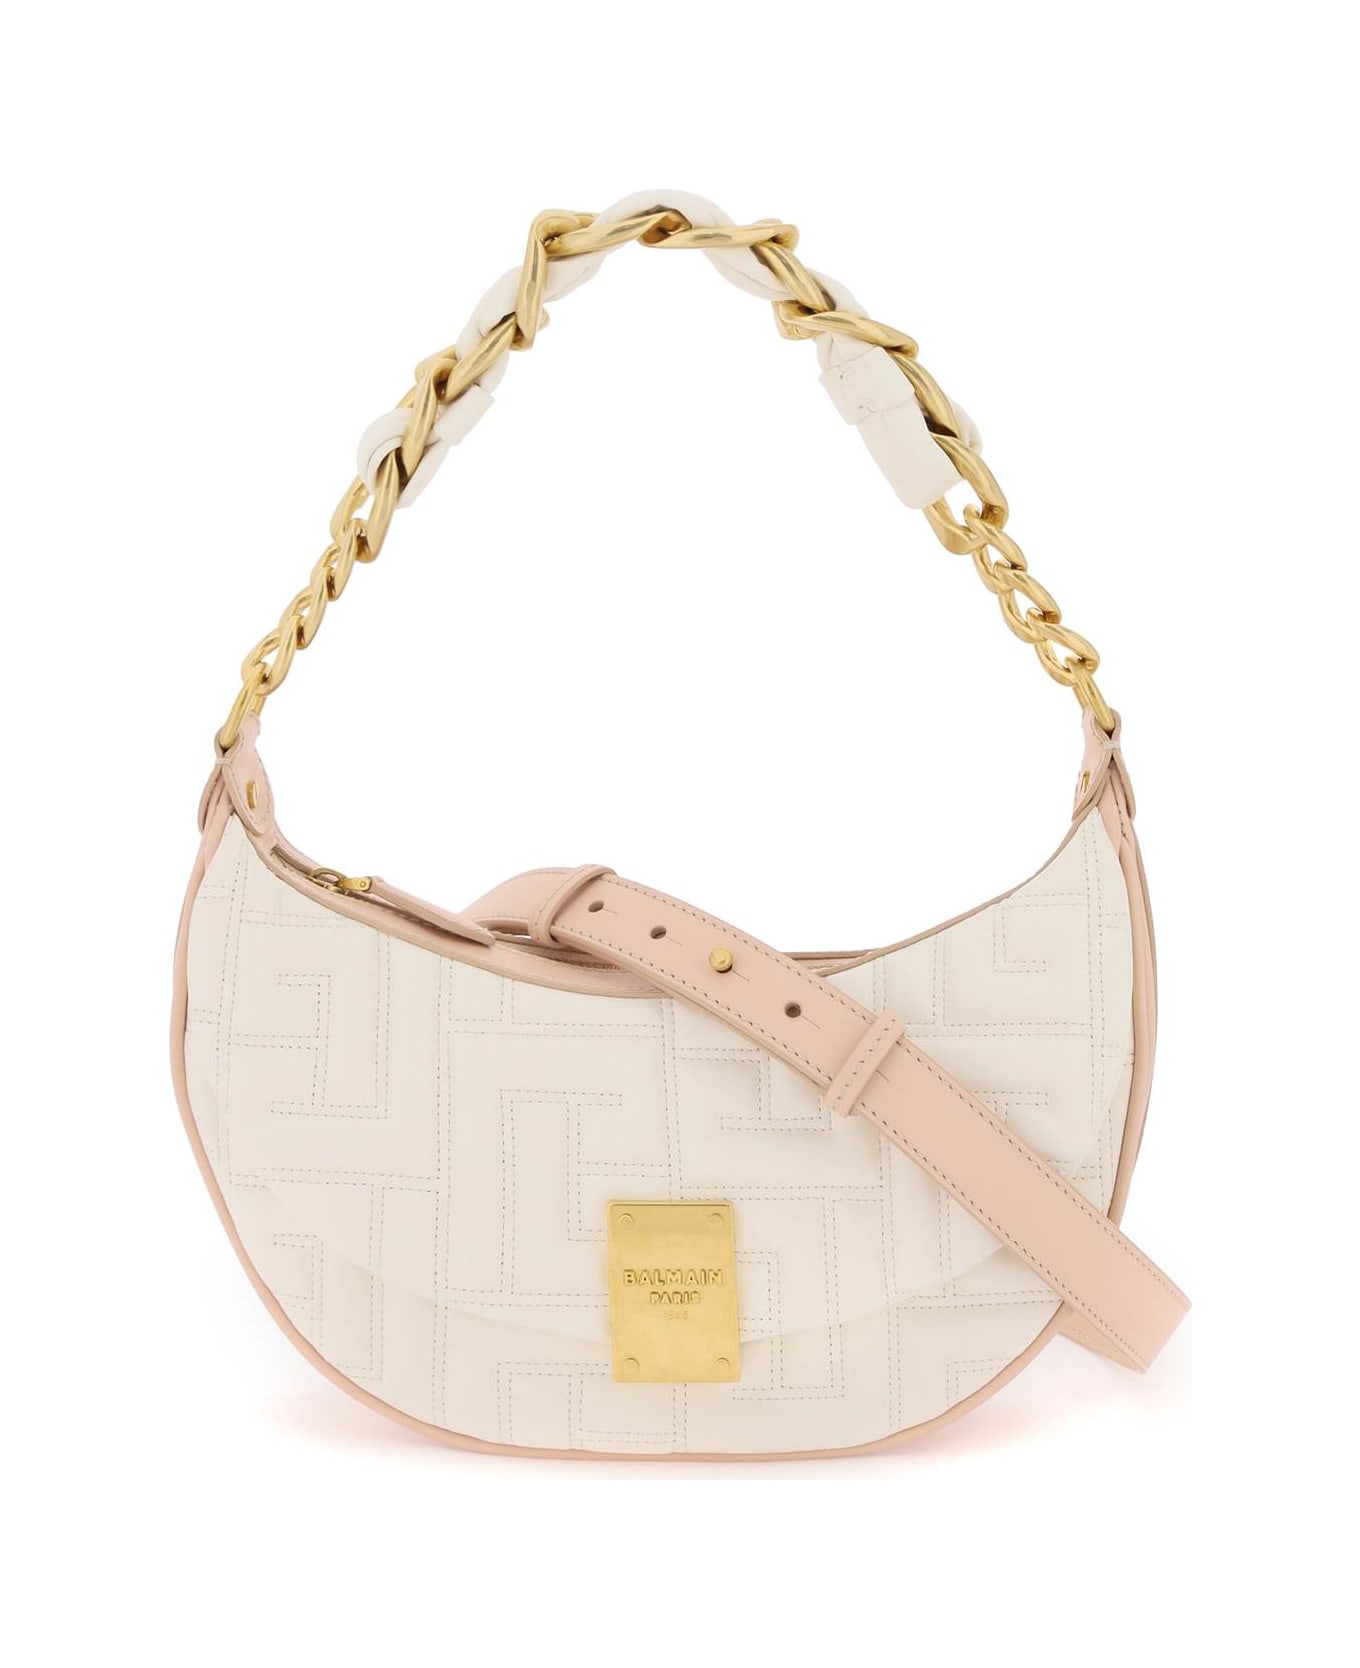 Balmain 1945 Soft Quilted Leather Hobo Bag - CREME NUDE ROSÉ (White) トートバッグ